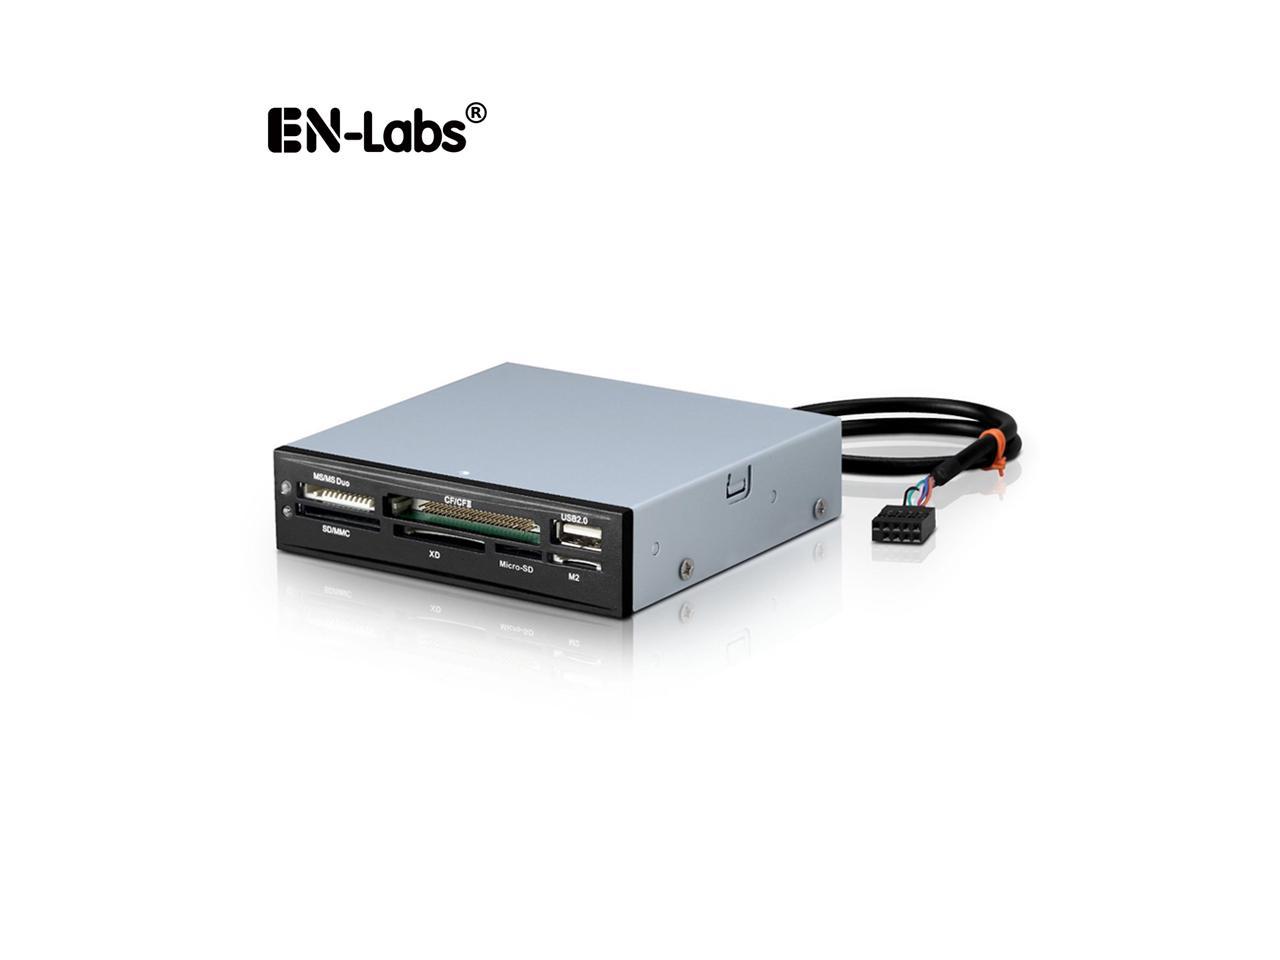 Computer Cables Hot Worldwide 3.5 2-USB 2.0 Port HUB HD Audio Output Floppy Drive Expansion Front Panel New CN, Cable Length: 60cm 